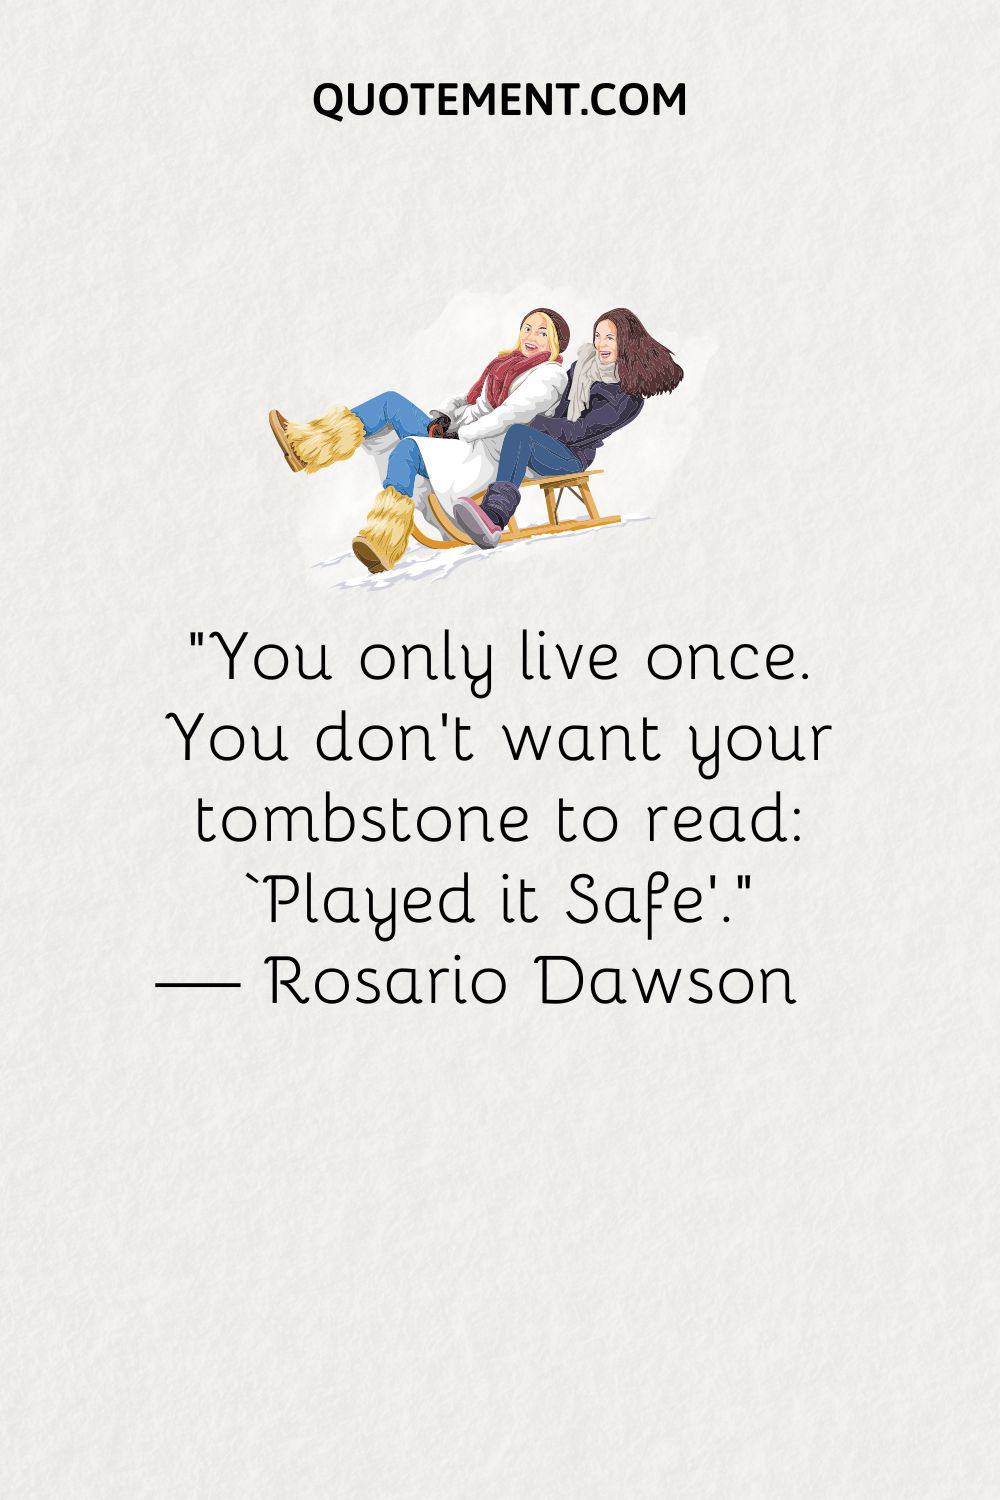 “You only live once. You don’t want your tombstone to read ‘Played it Safe.’” — Rosario Dawson